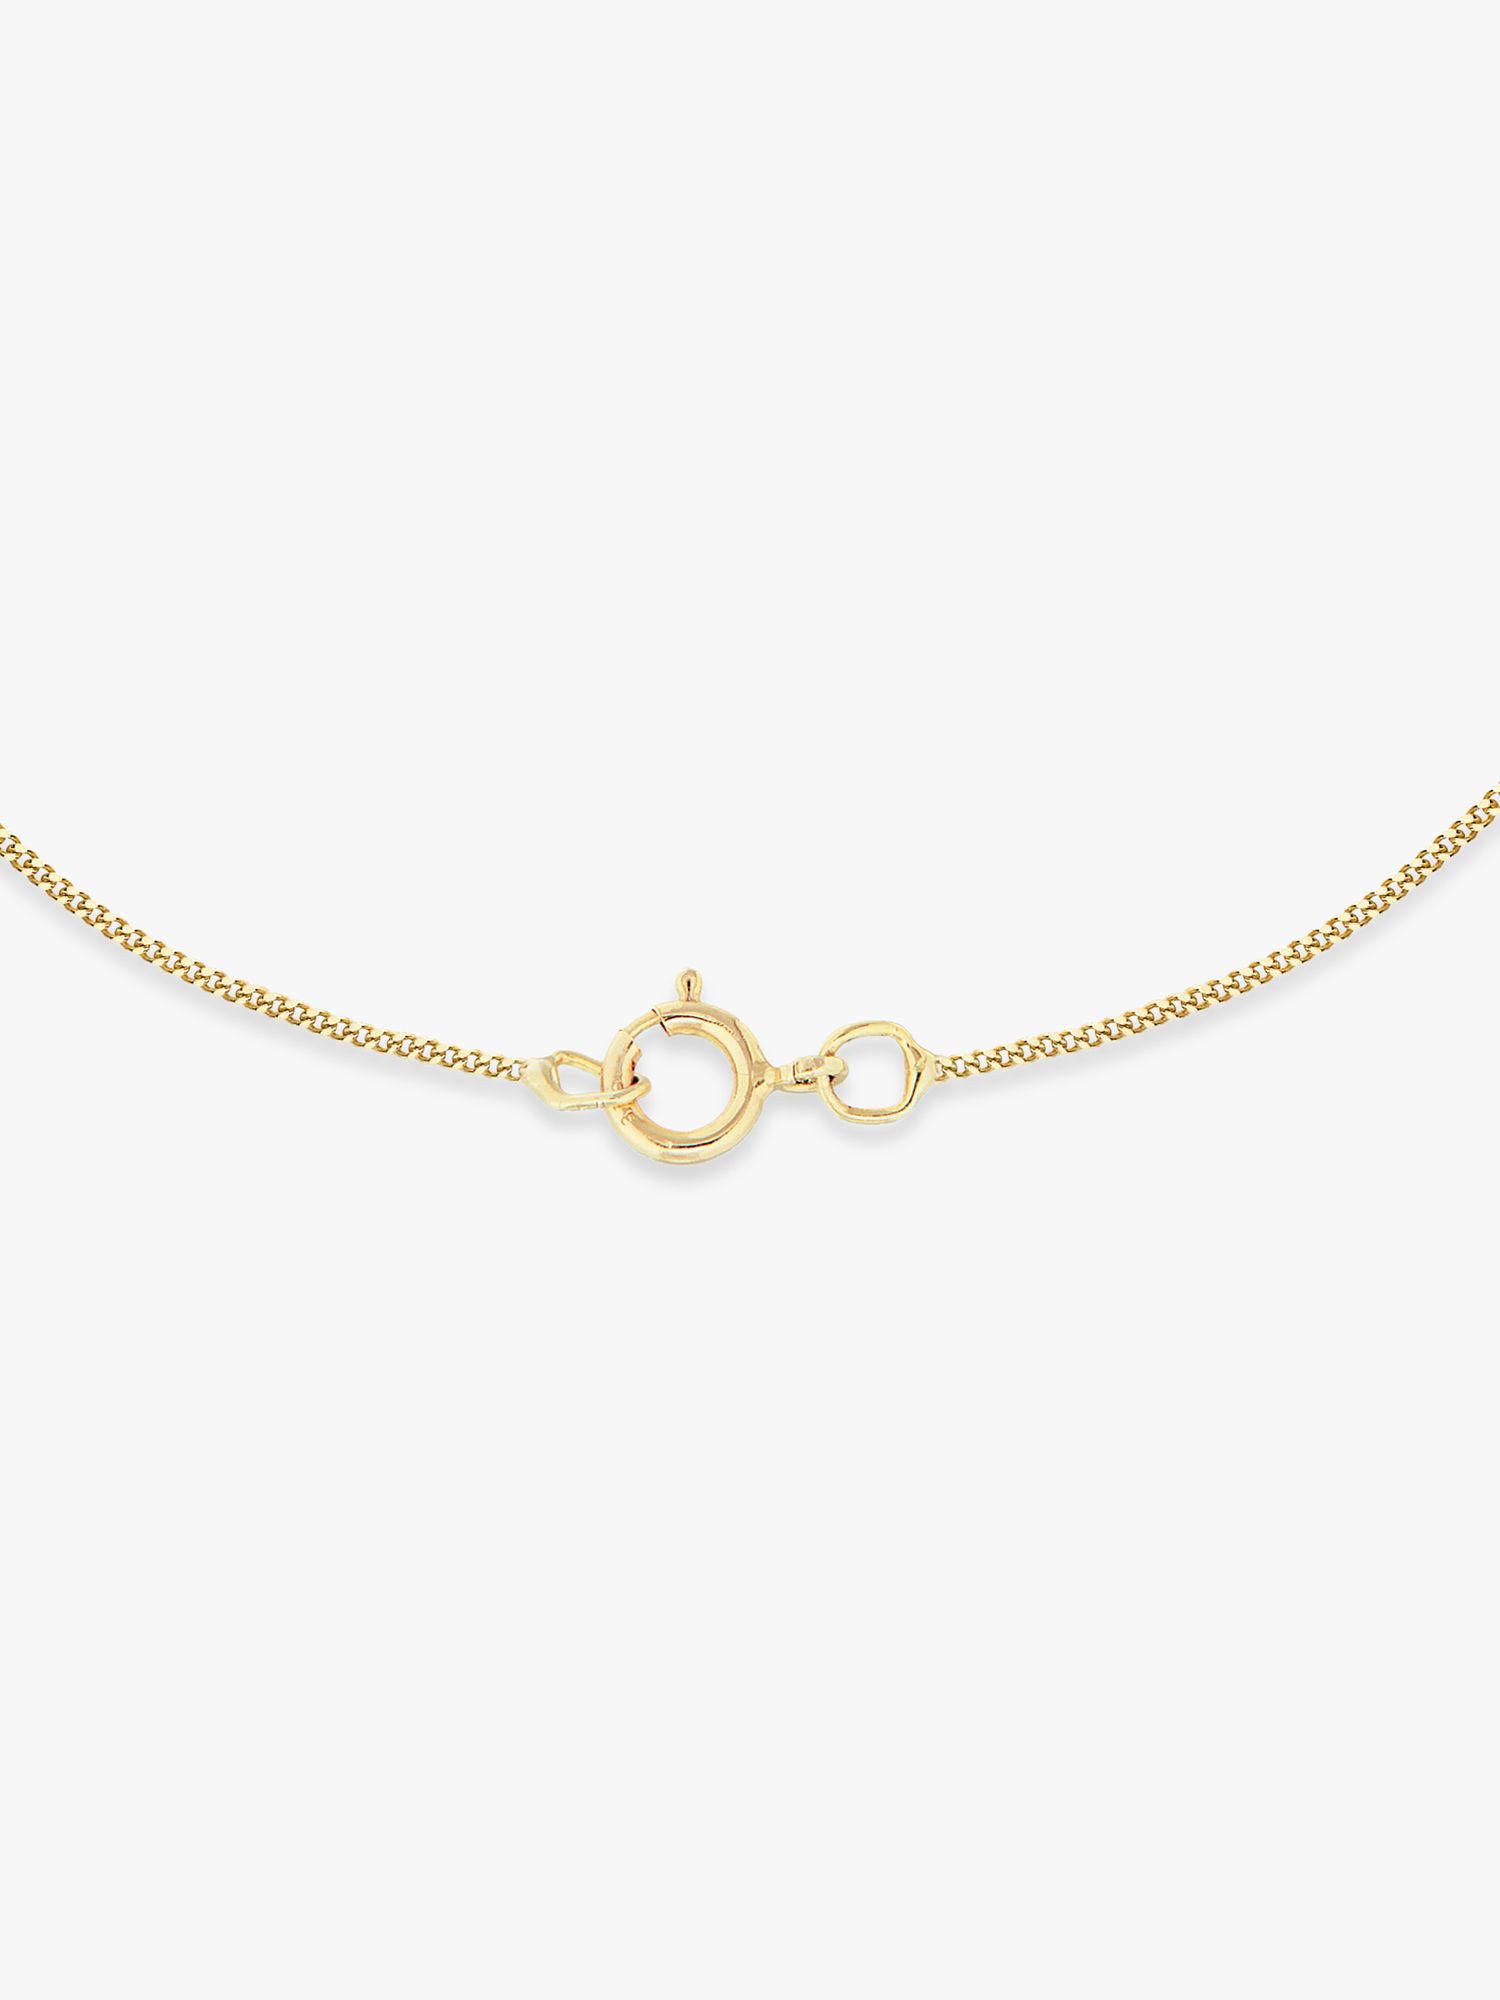 IBB 9ct Yellow Gold Knot Pendant Necklace, Gold at John Lewis & Partners